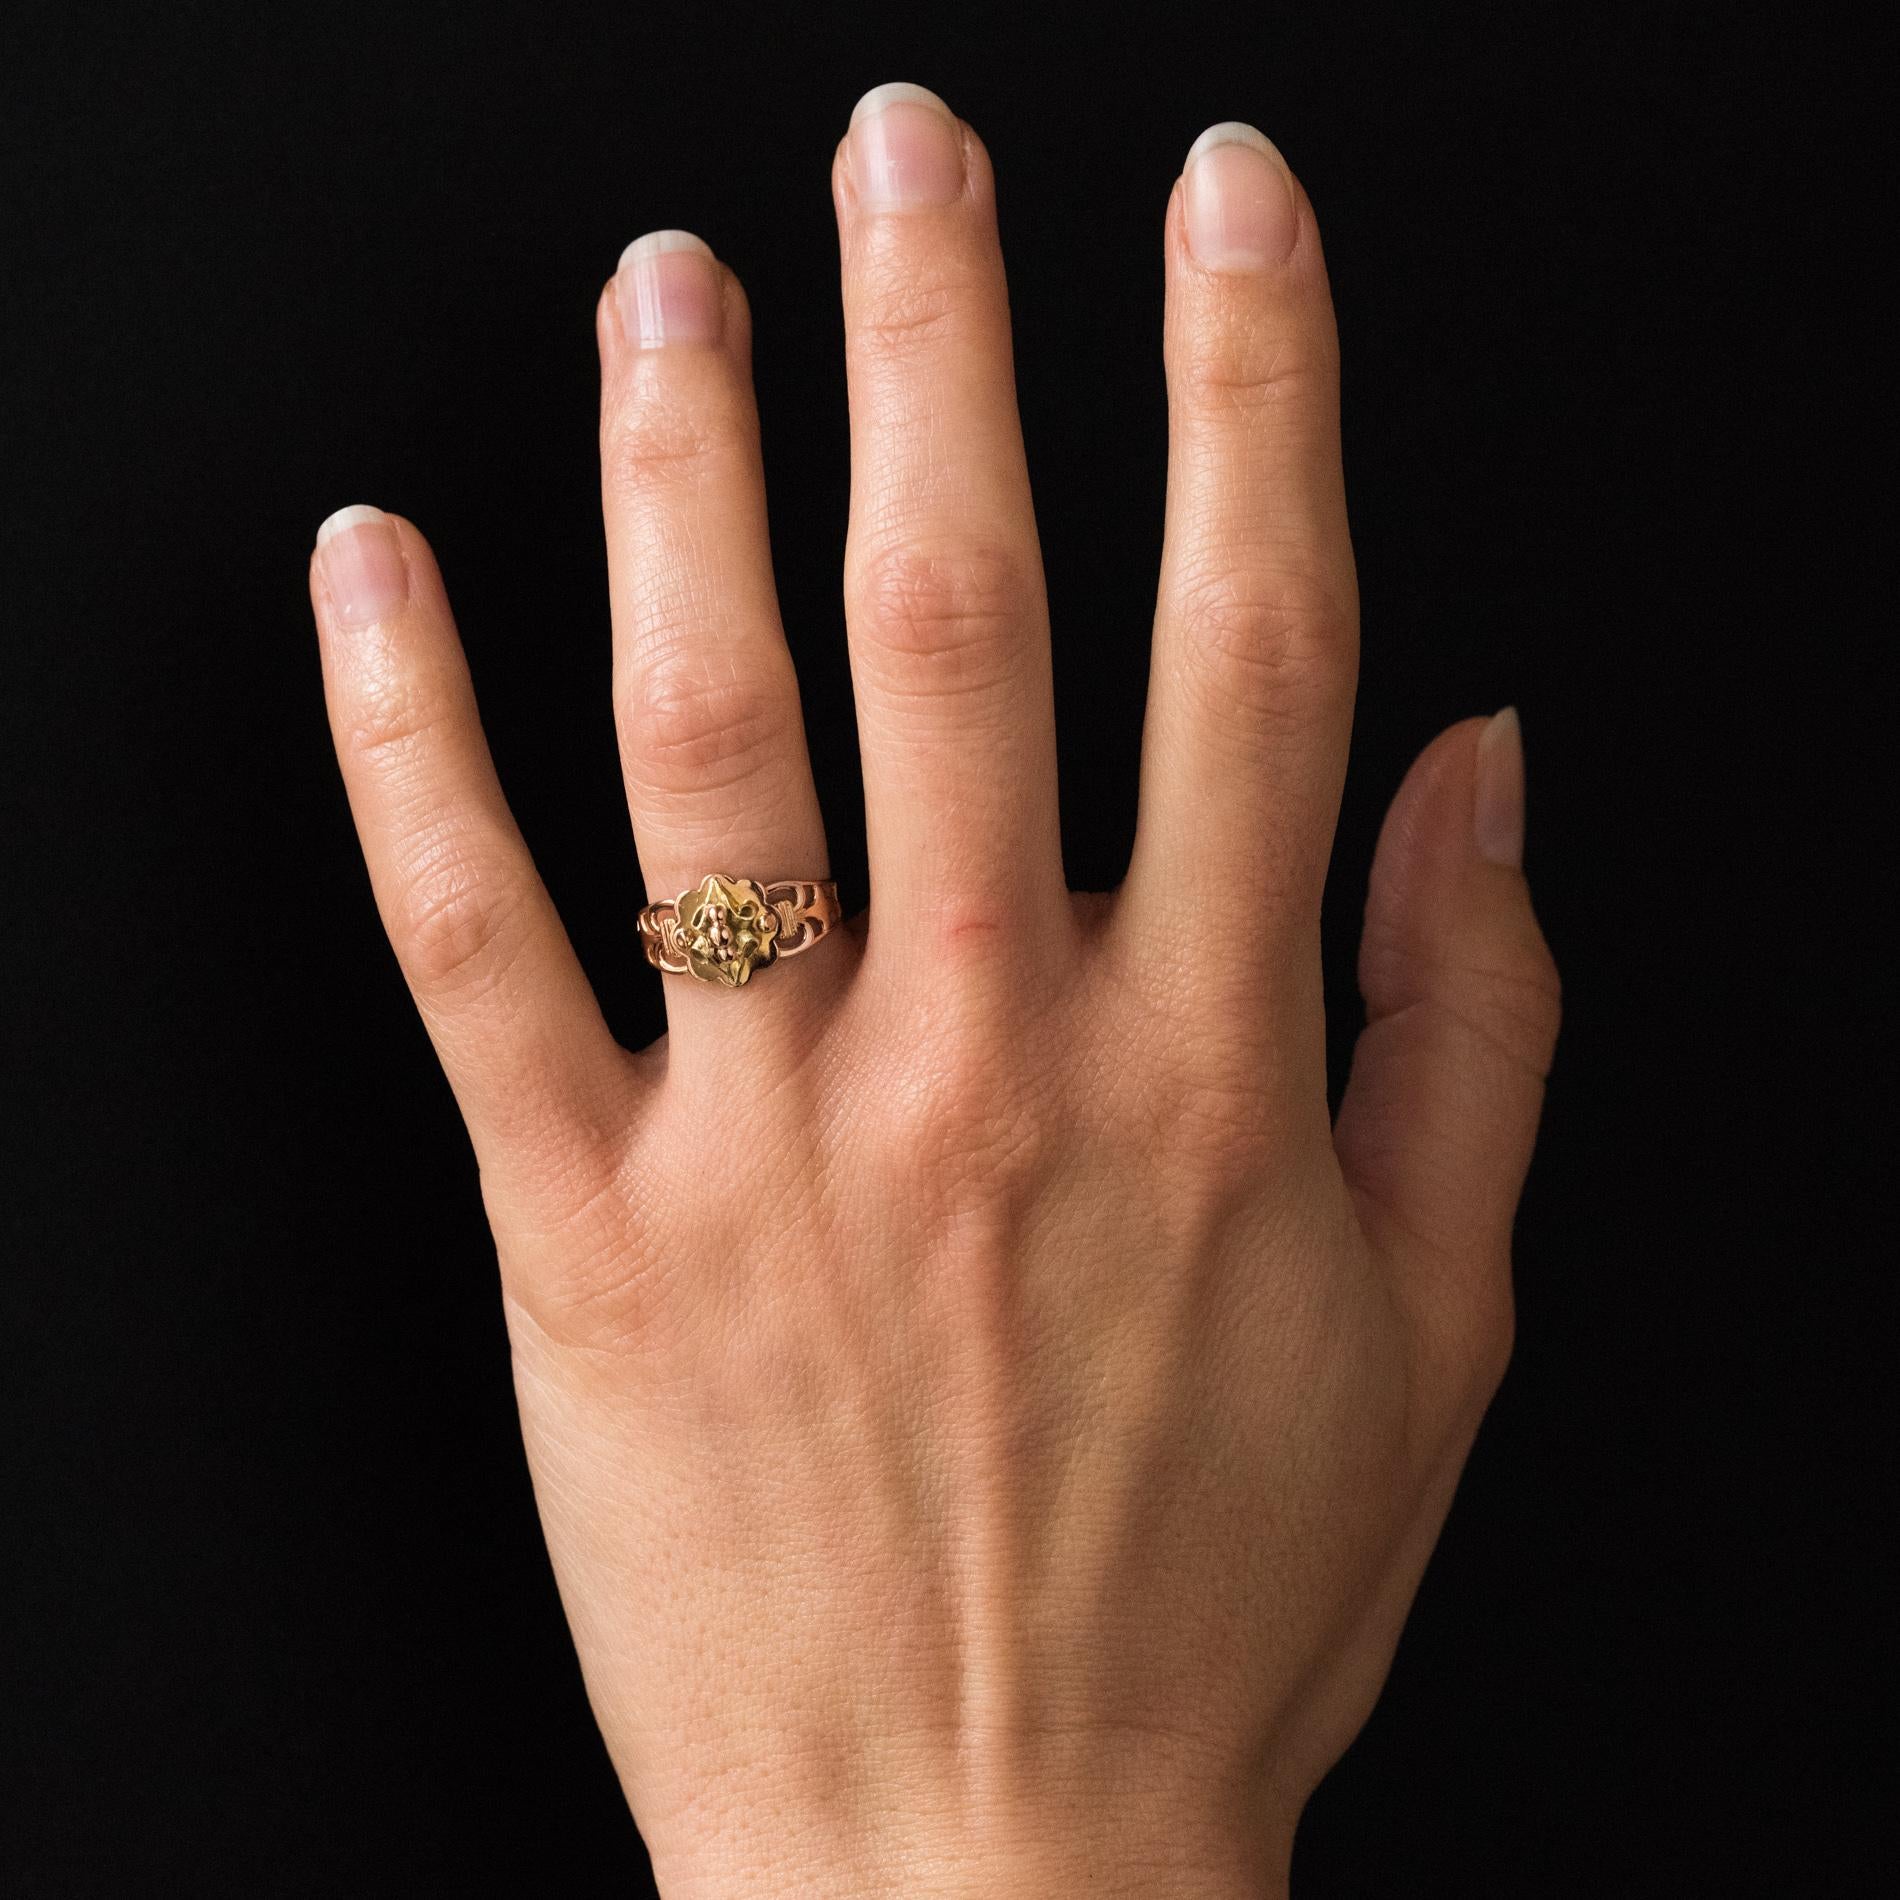 Ring in 18 karat rose and yellow gold, eagle's head hallmark.
This lovely fellings ring is adorned on the top with a center knot motif and shouldered with gold pearls. On either side, the start of the ring is pierced with fleur-de-lis.
Height: 10.1